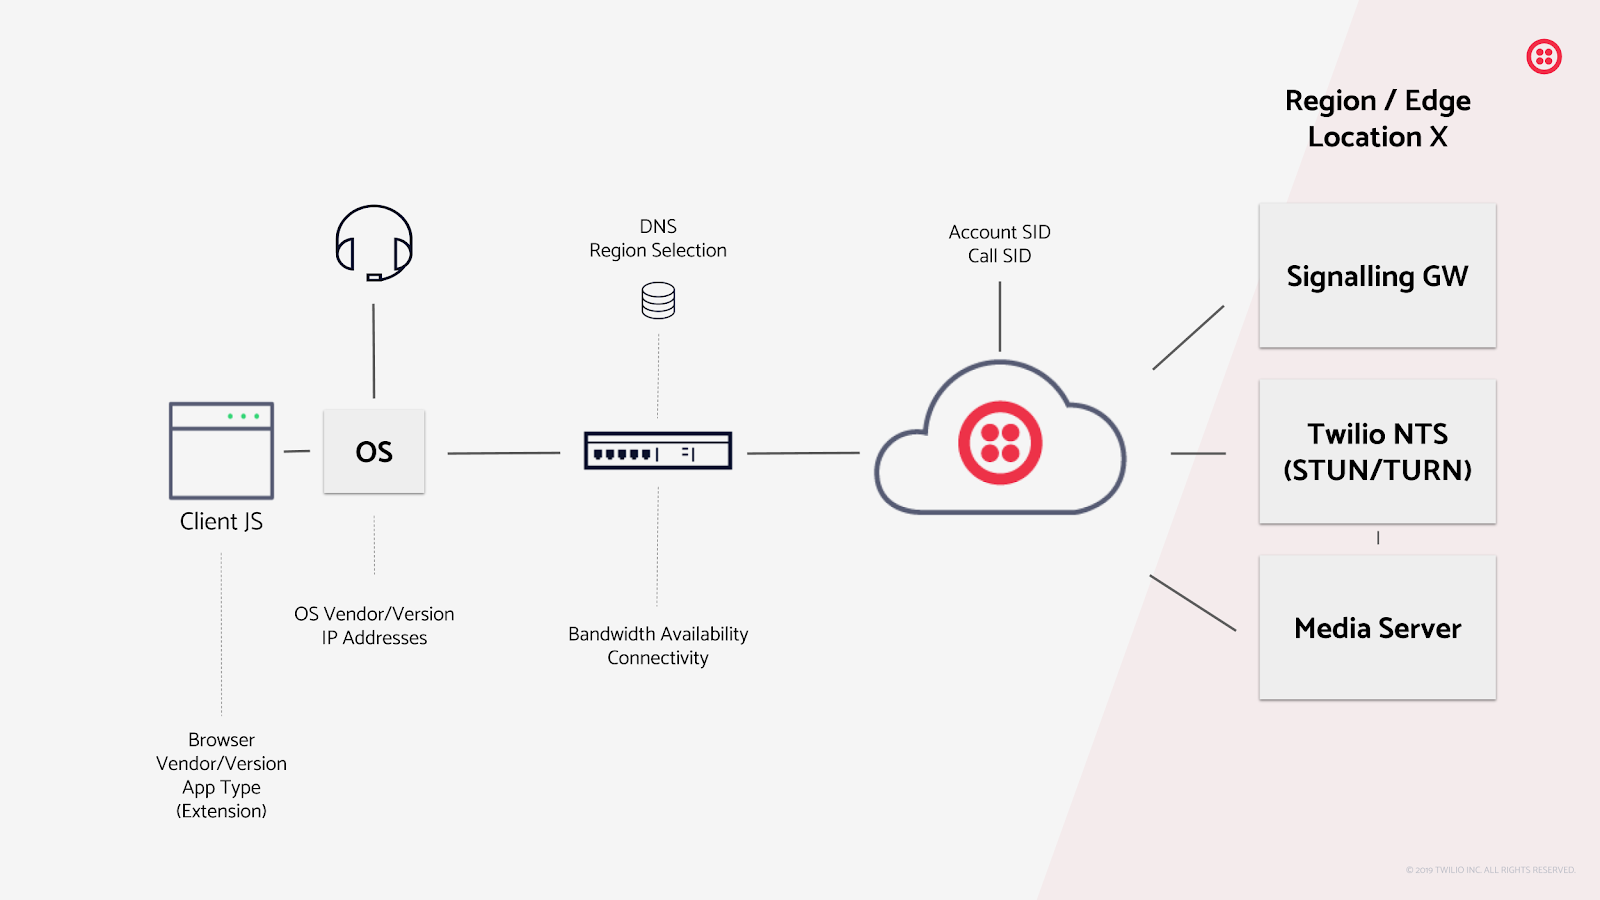 Image shows how A typical VoIP service requires many connected parts to work together flawlessly. The Voice Diagnostics Web App and SDK help with checking for VoIP calling readiness